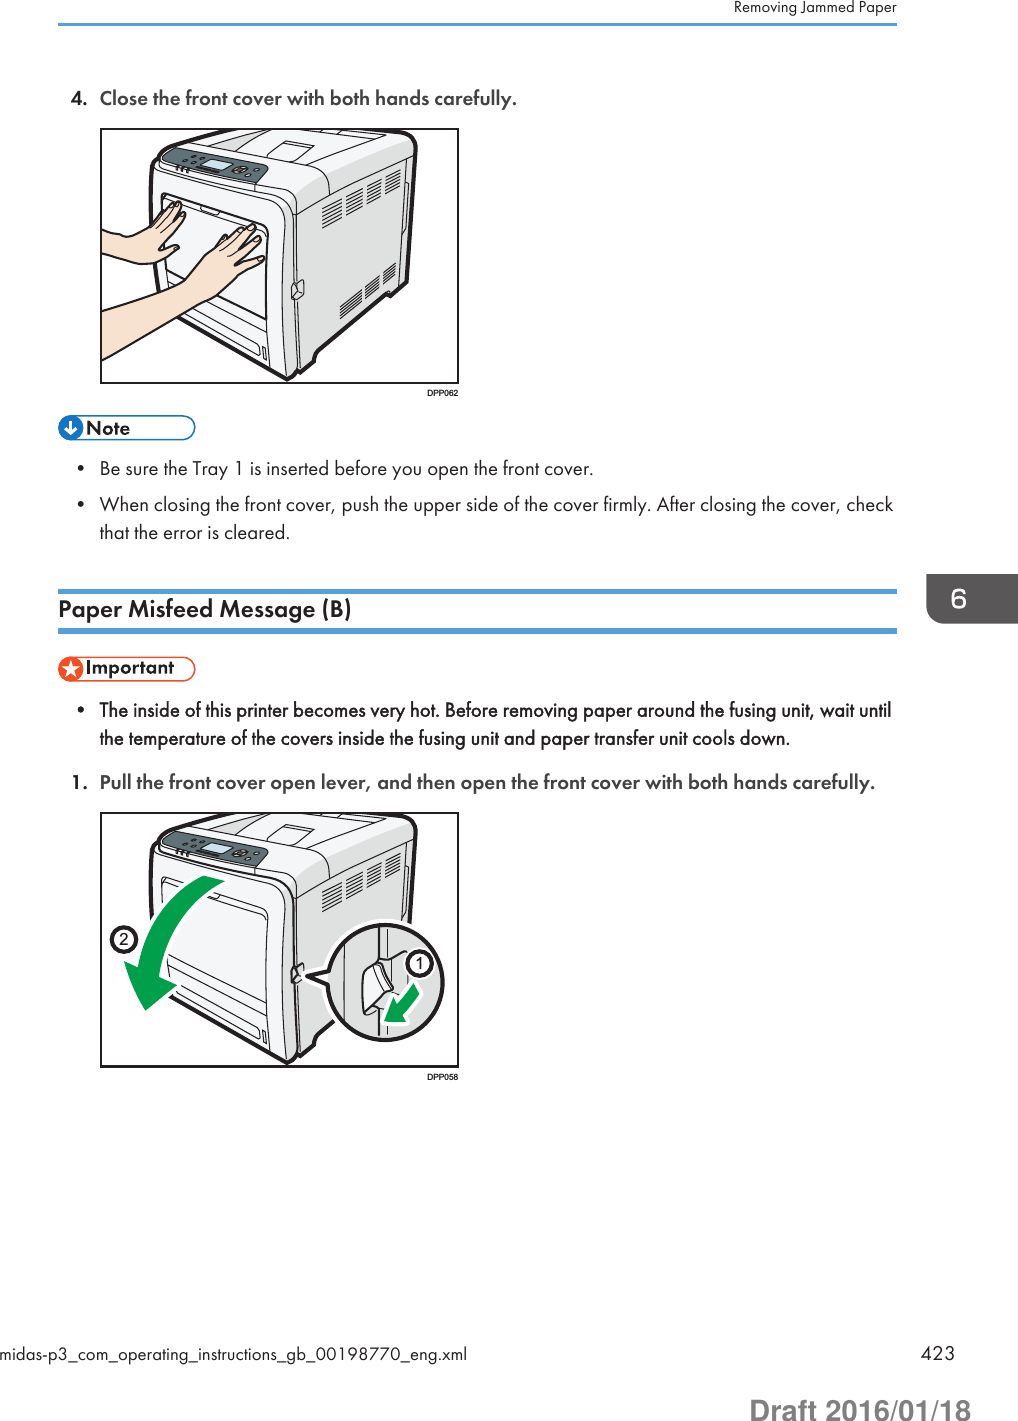 4. Close the front cover with both hands carefully.DPP062• Be sure the Tray 1 is inserted before you open the front cover.• When closing the front cover, push the upper side of the cover firmly. After closing the cover, checkthat the error is cleared.Paper Misfeed Message (B)• The inside of this printer becomes very hot. Before removing paper around the fusing unit, wait untilthe temperature of the covers inside the fusing unit and paper transfer unit cools down.1. Pull the front cover open lever, and then open the front cover with both hands carefully.12DPP058Removing Jammed Papermidas-p3_com_operating_instructions_gb_00198770_eng.xml 423Draft 2016/01/18